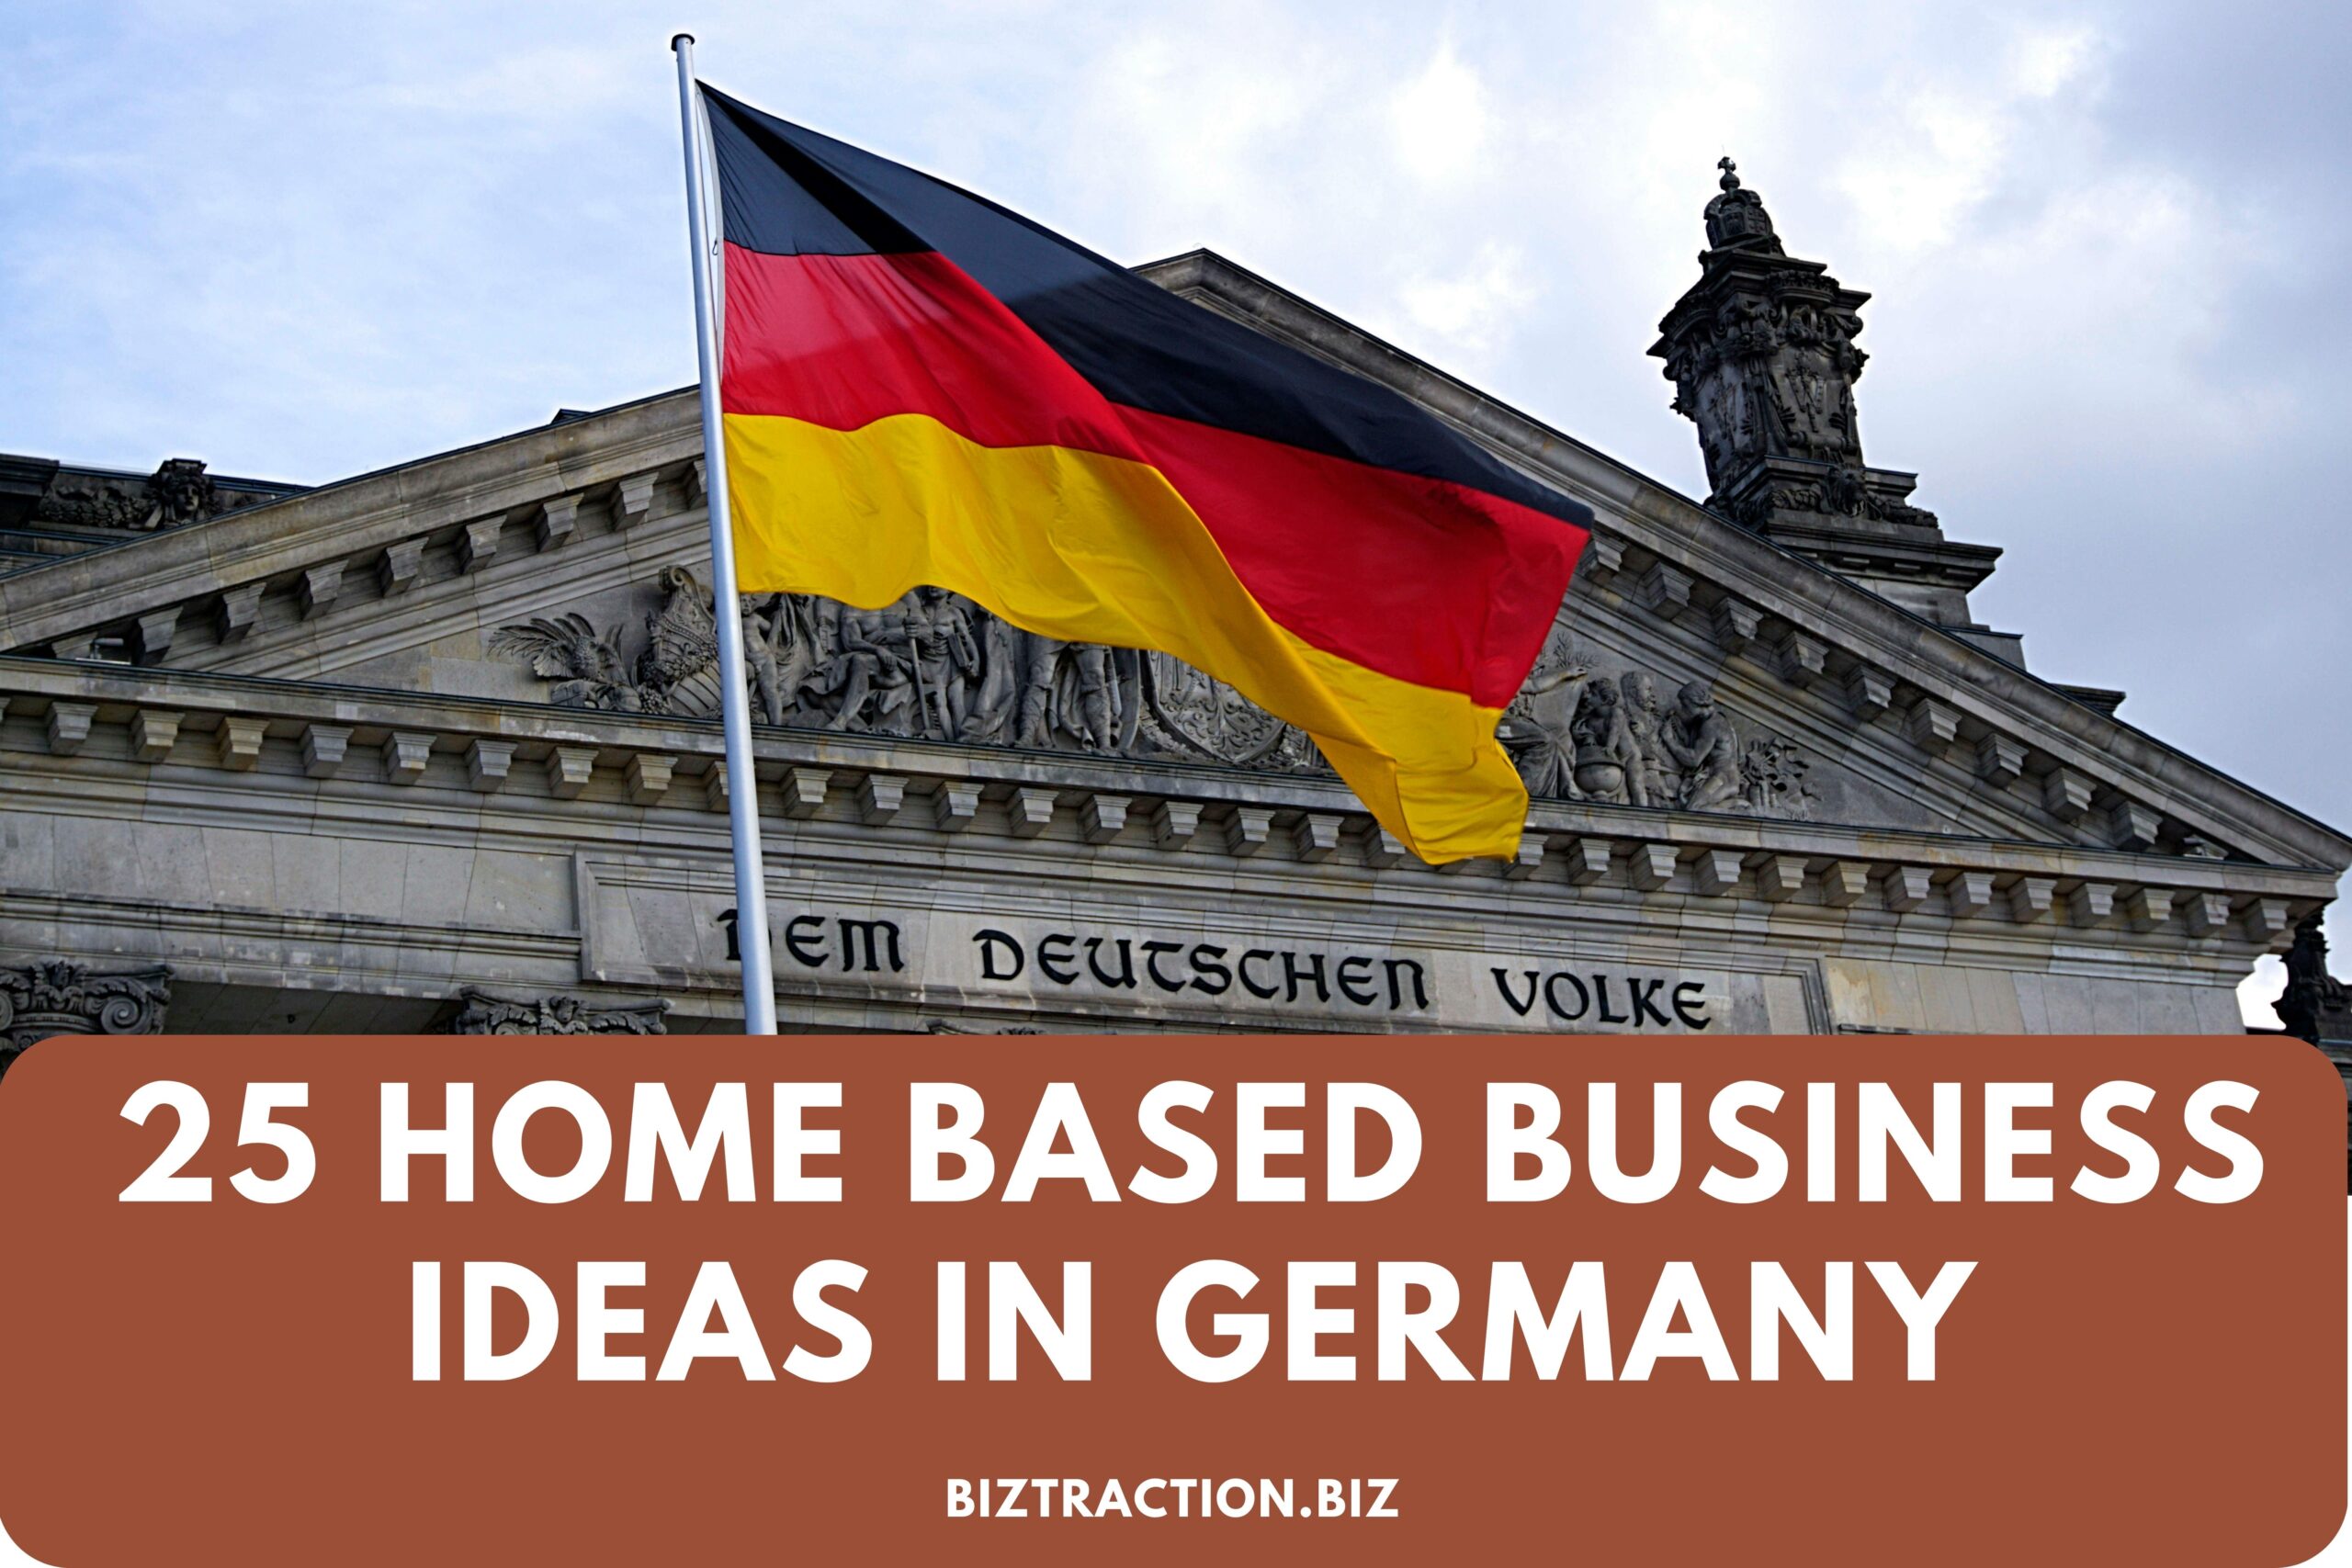 Home Based Business Ideas in Germany